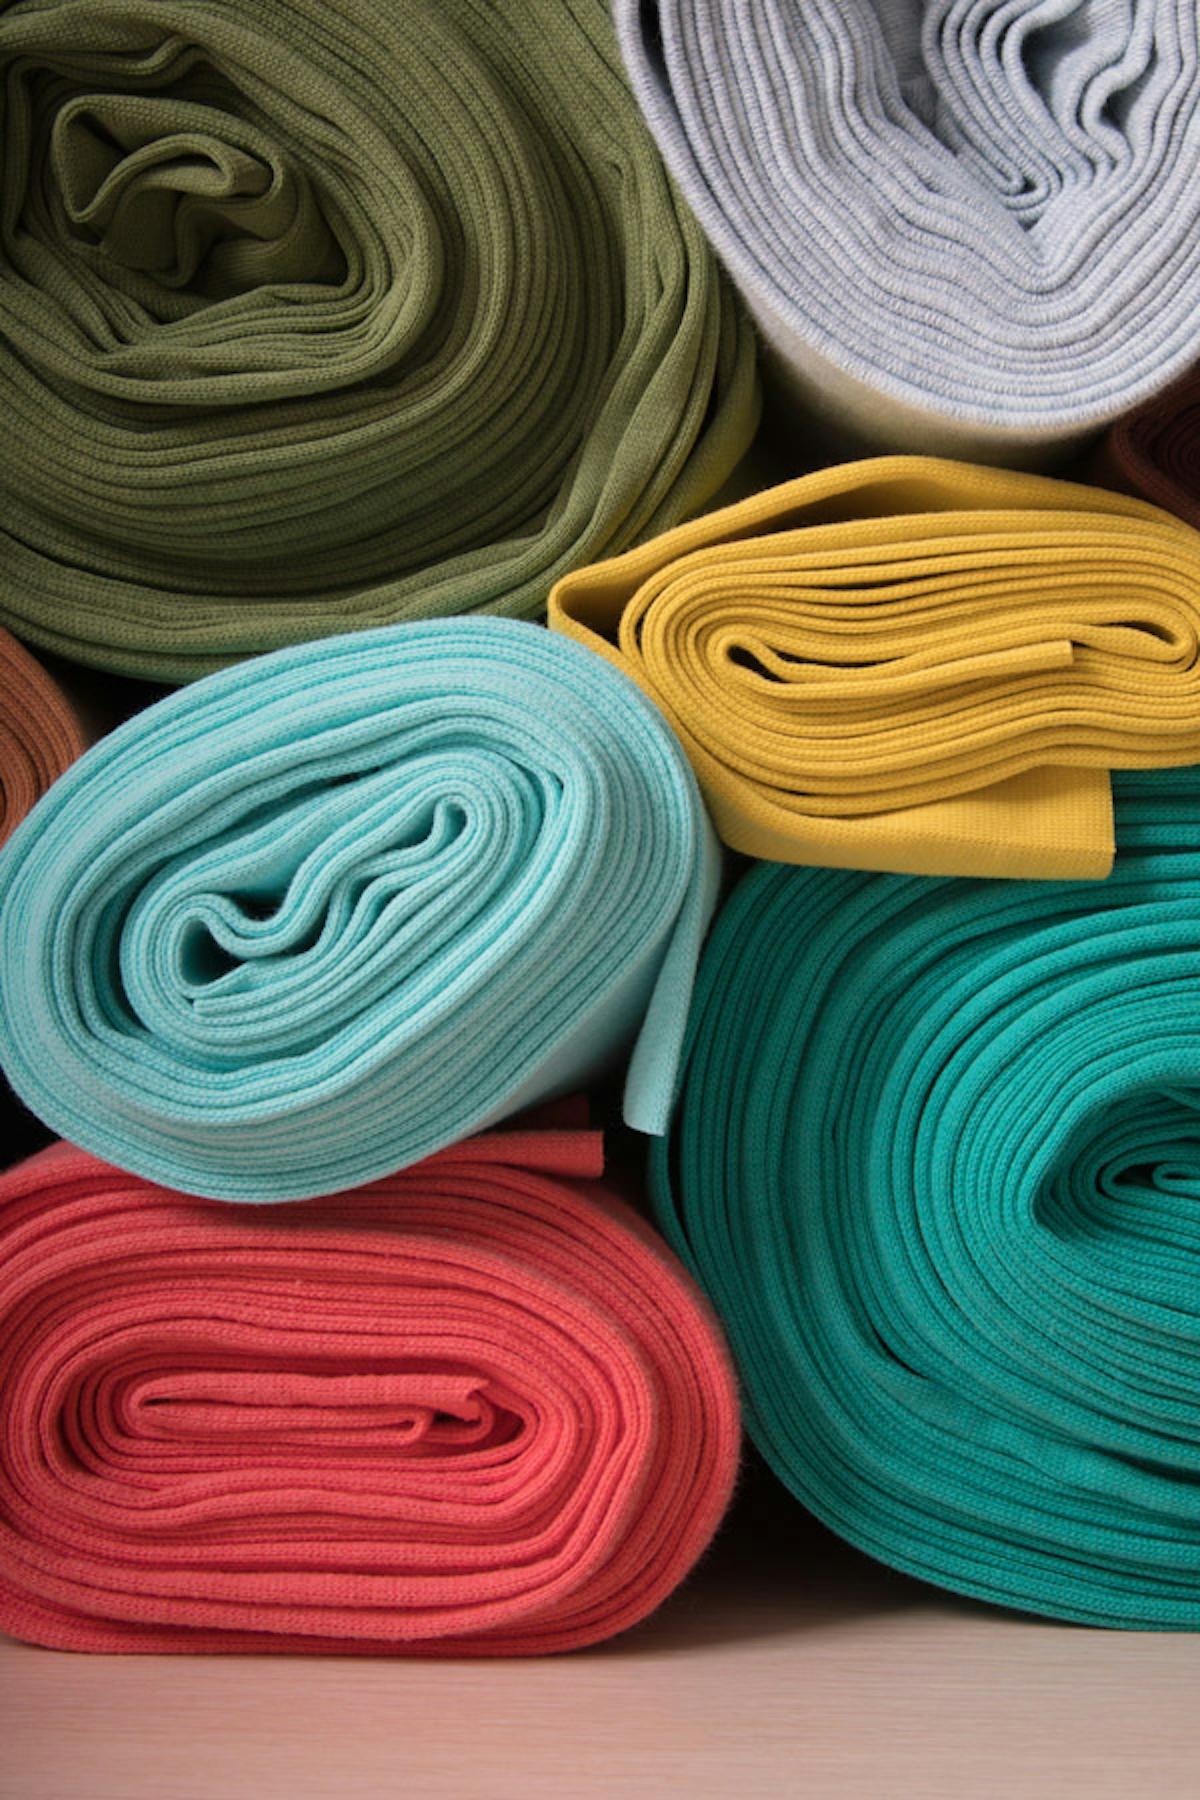 Types of Knit Fabric and their Application